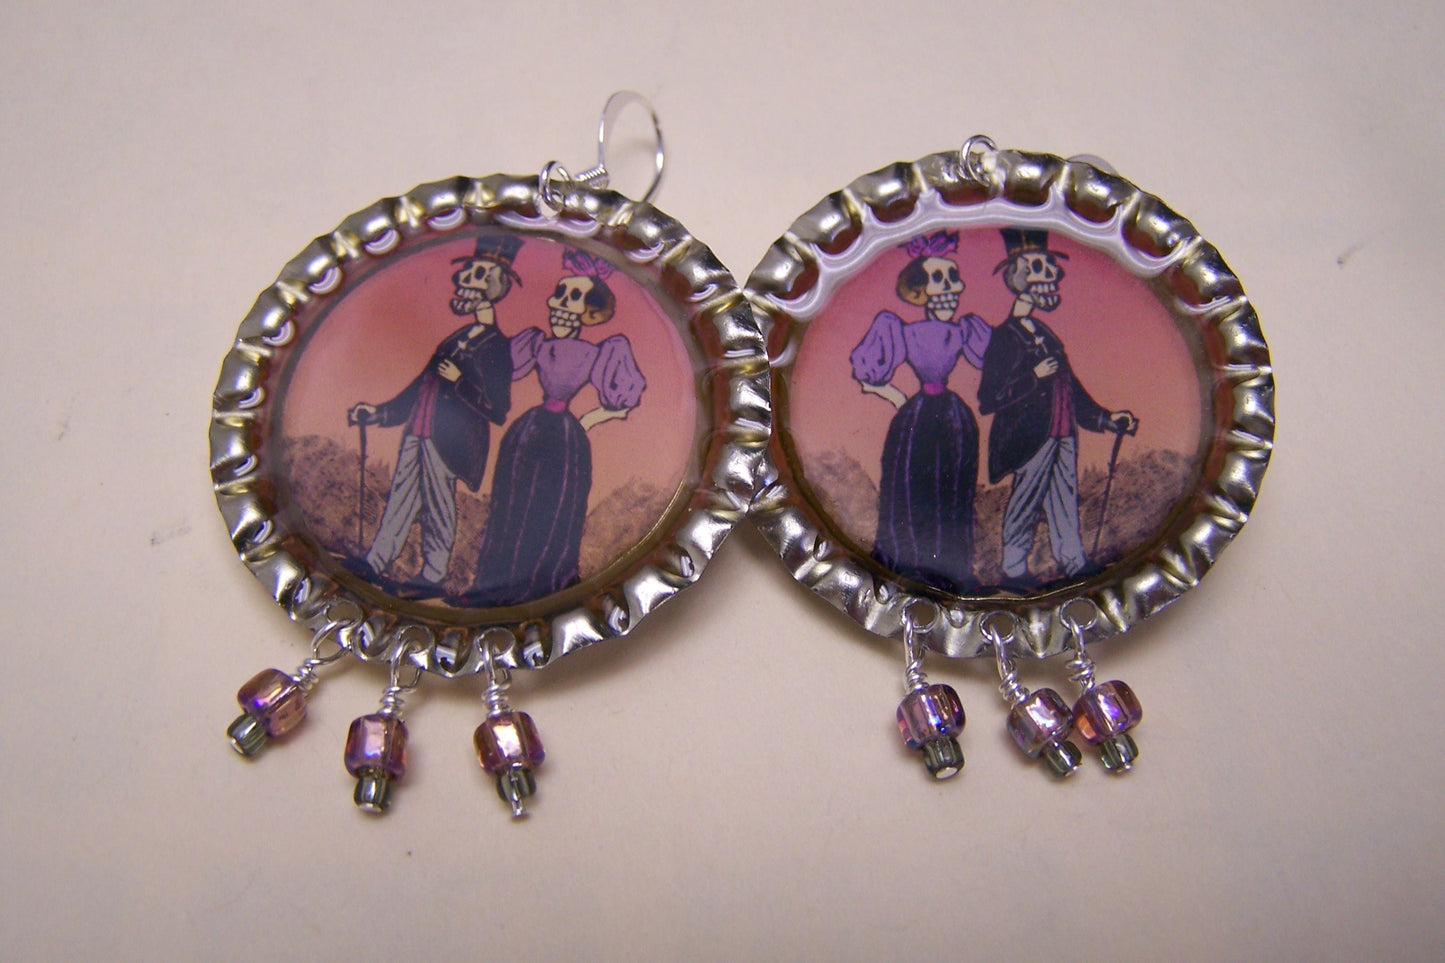 Bottlecap Earrings with Dangles - Mexican Day of the Dead Fancily Dressed Couple